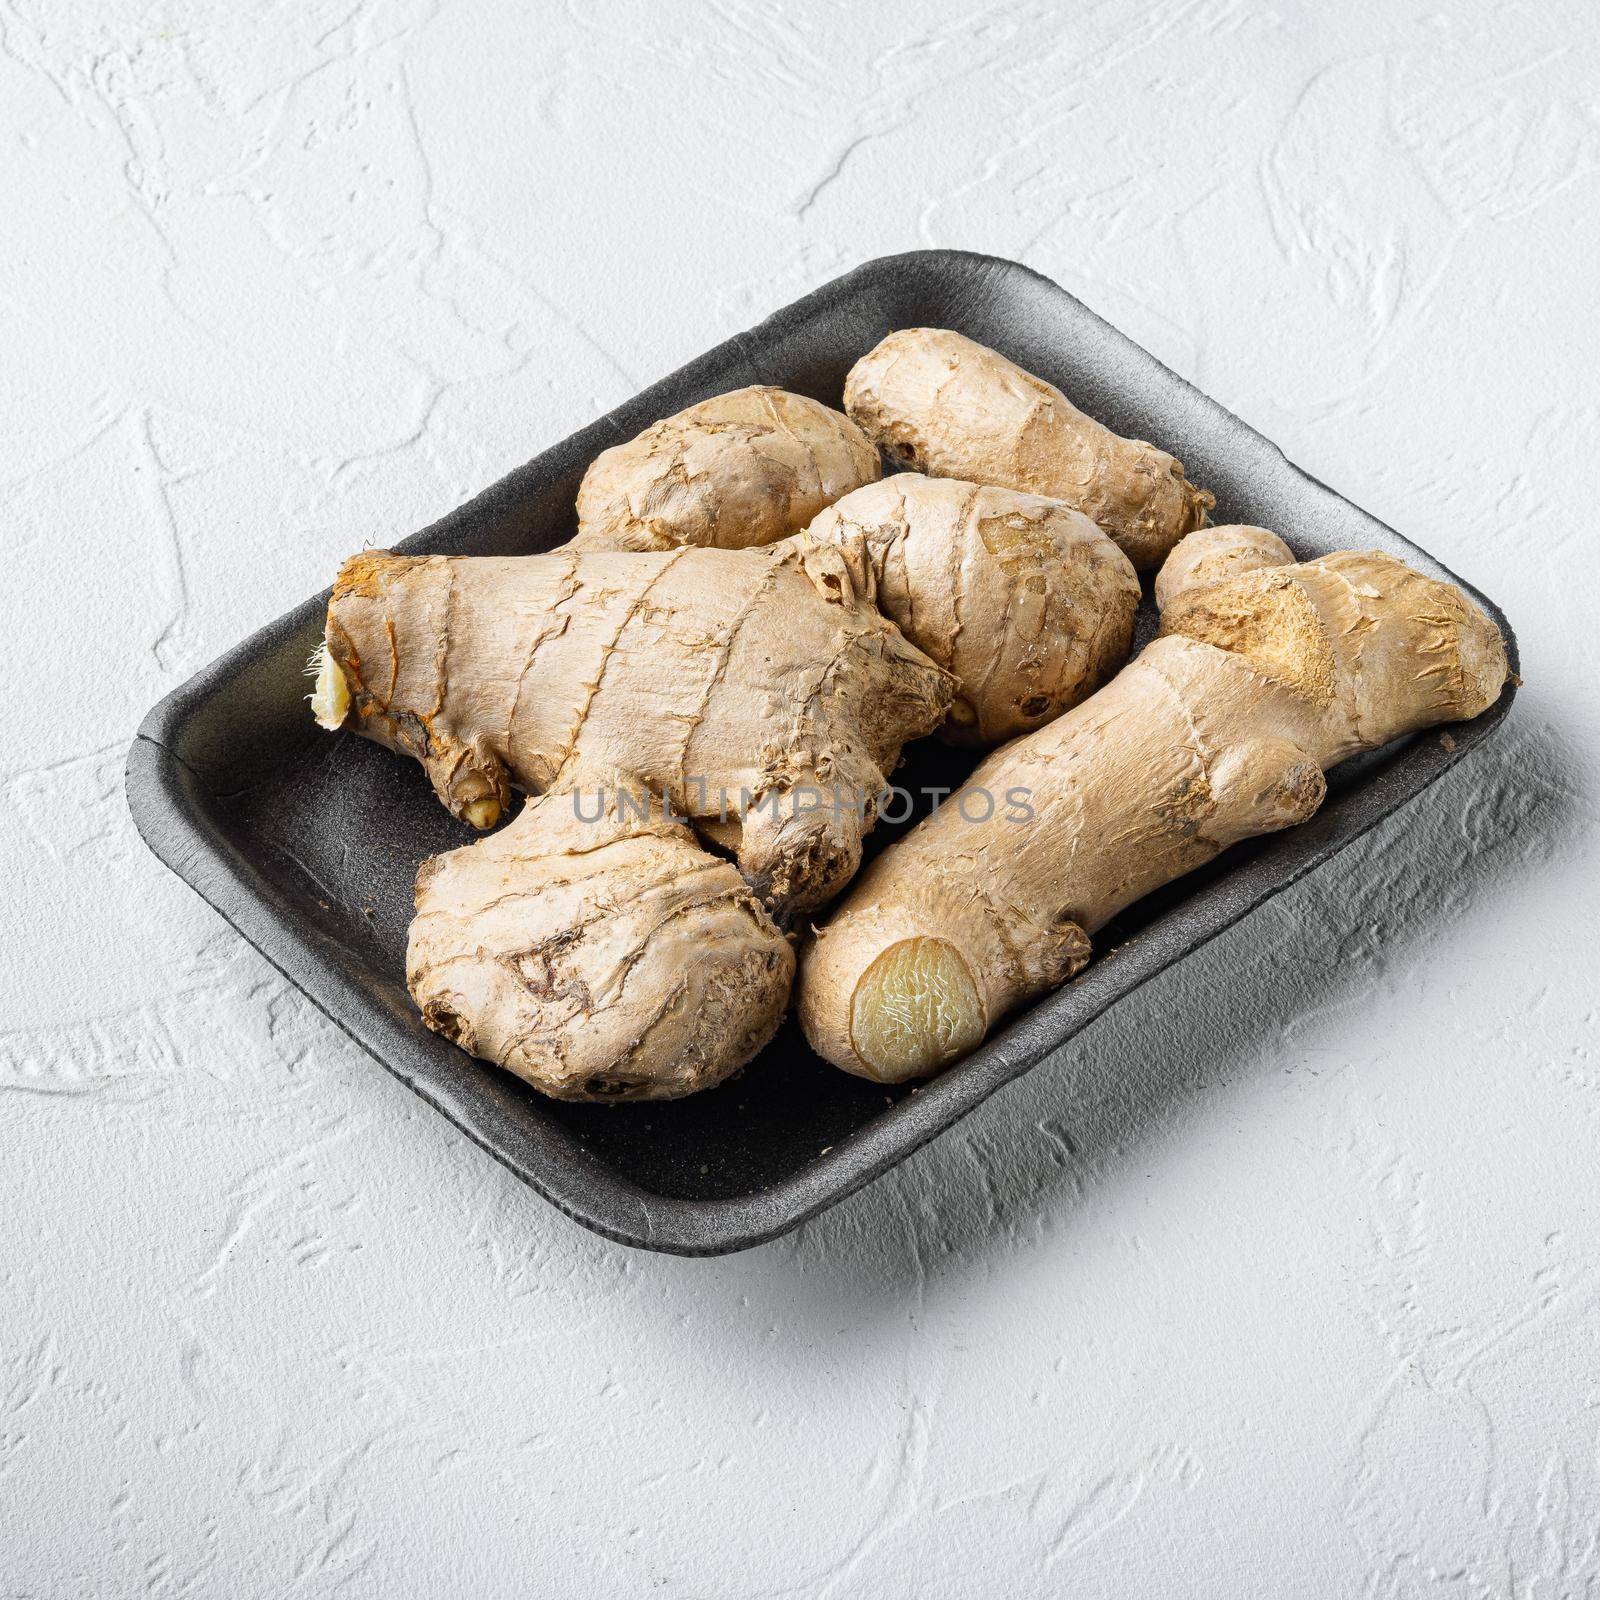 Trendy food whole ginger root, in plastic market container, square format, on white stone background by Ilianesolenyi